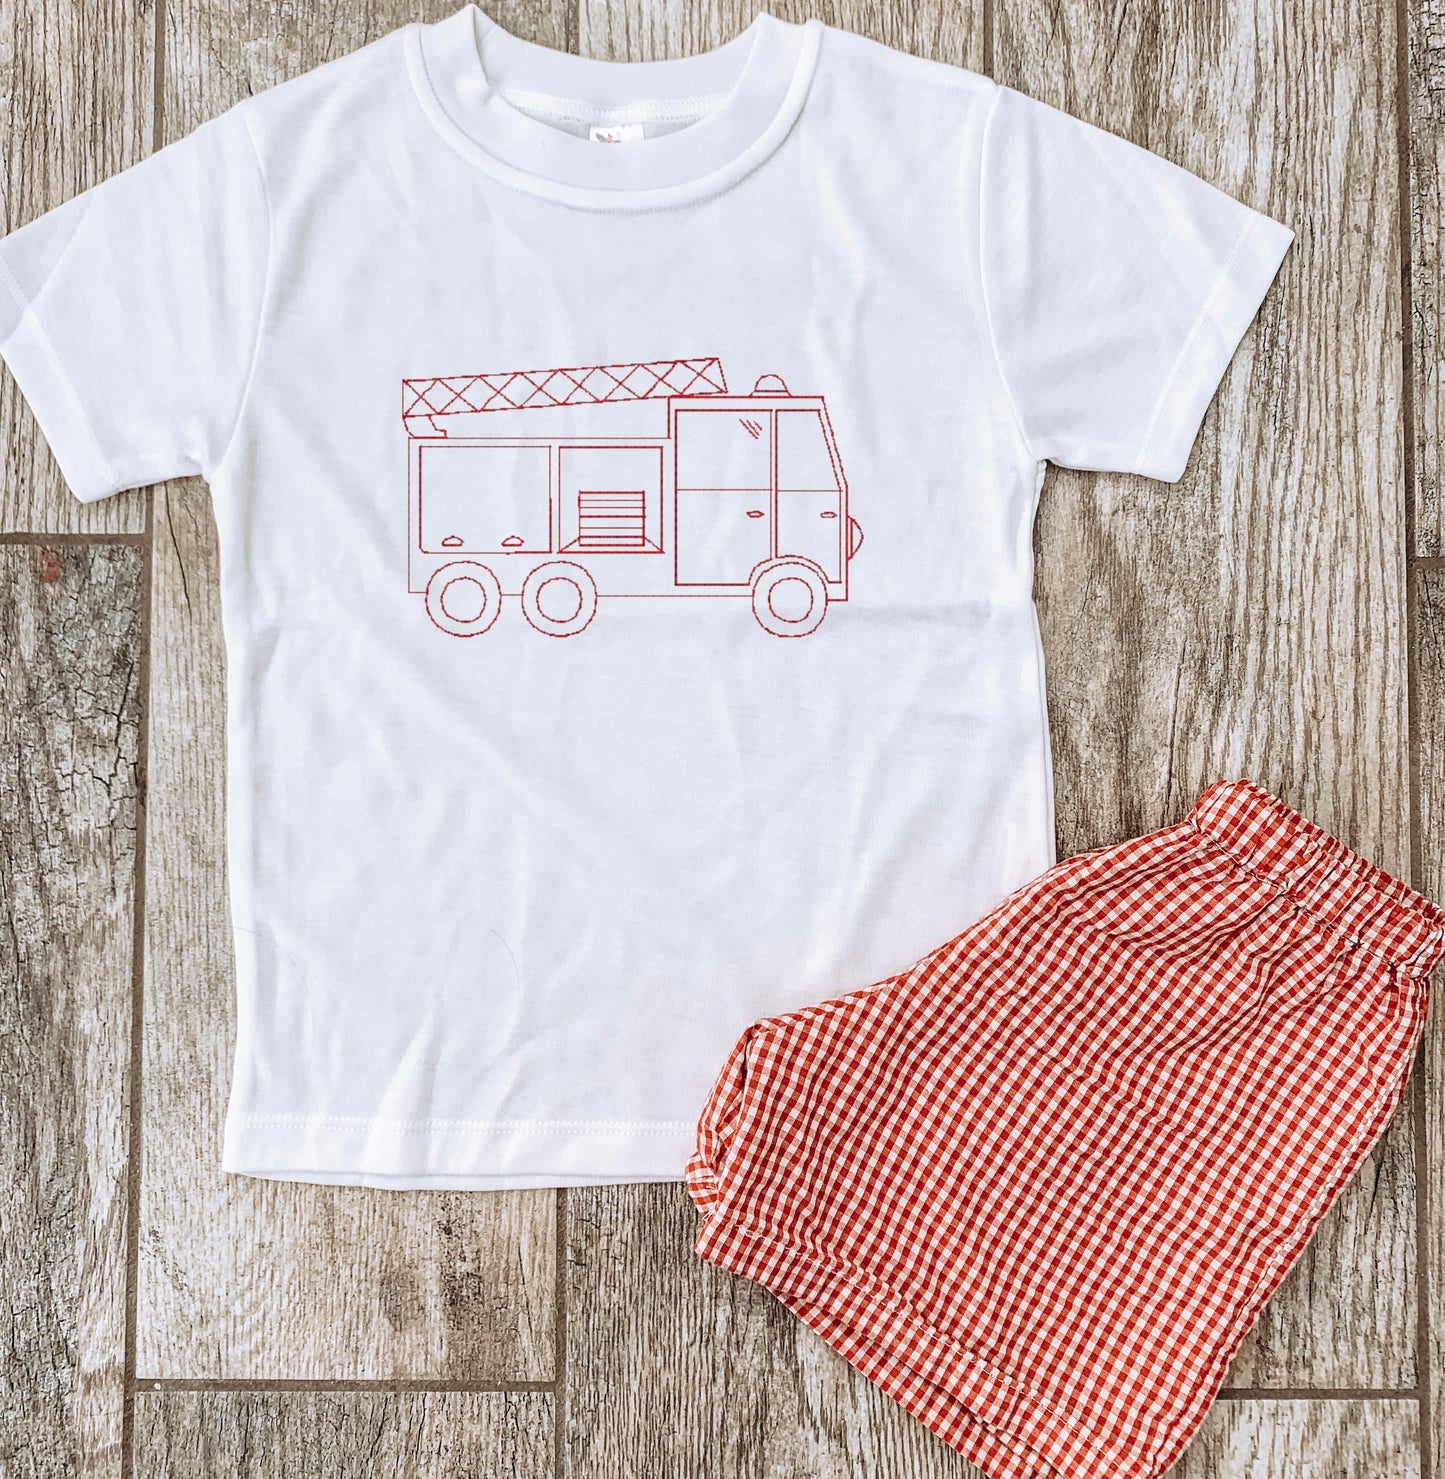 Embroidered Fire Truck Tee